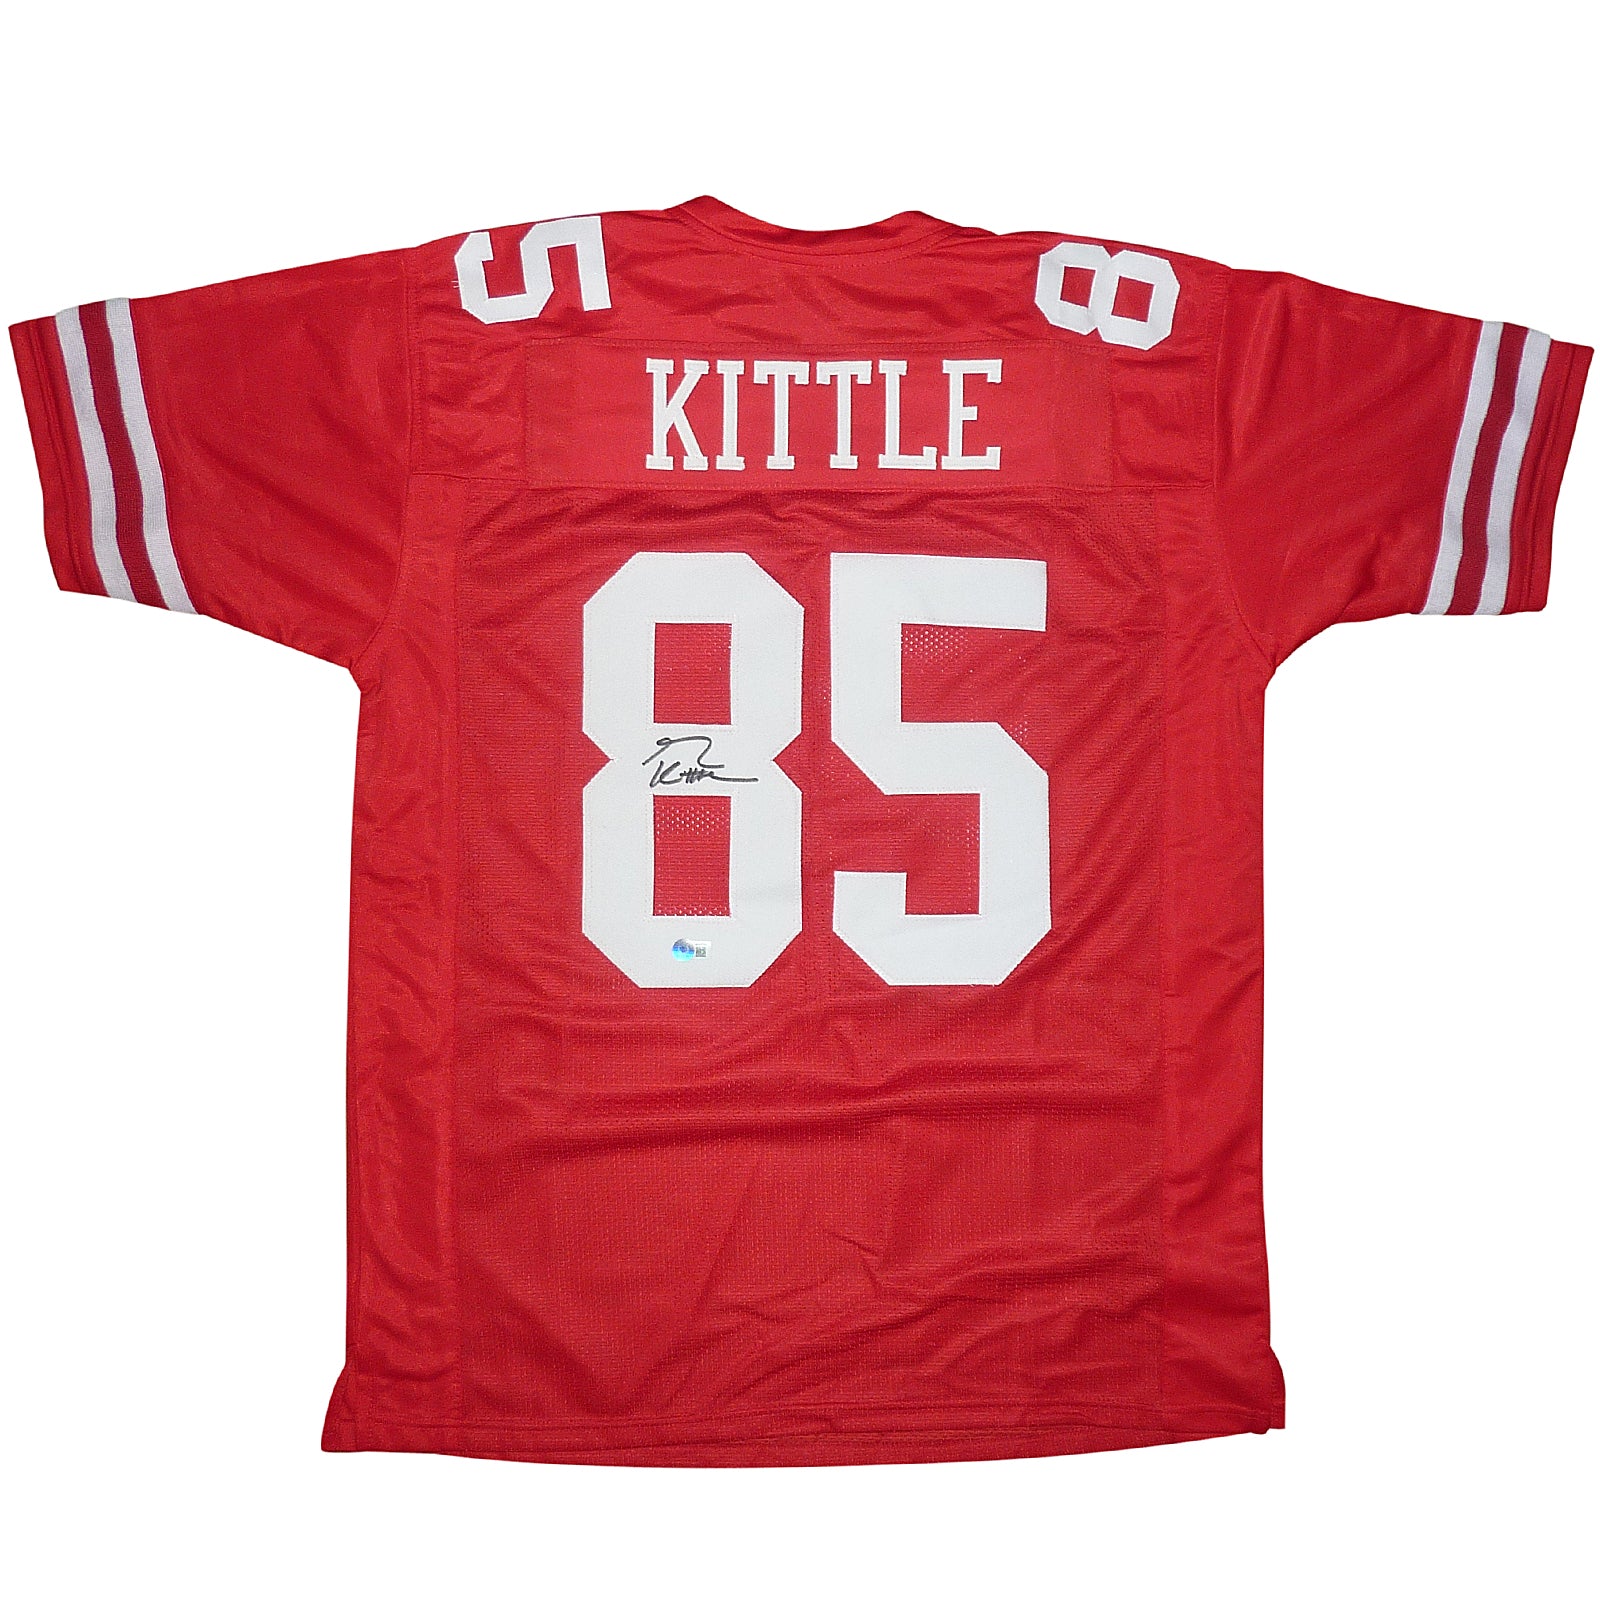 kittle autographed jersey